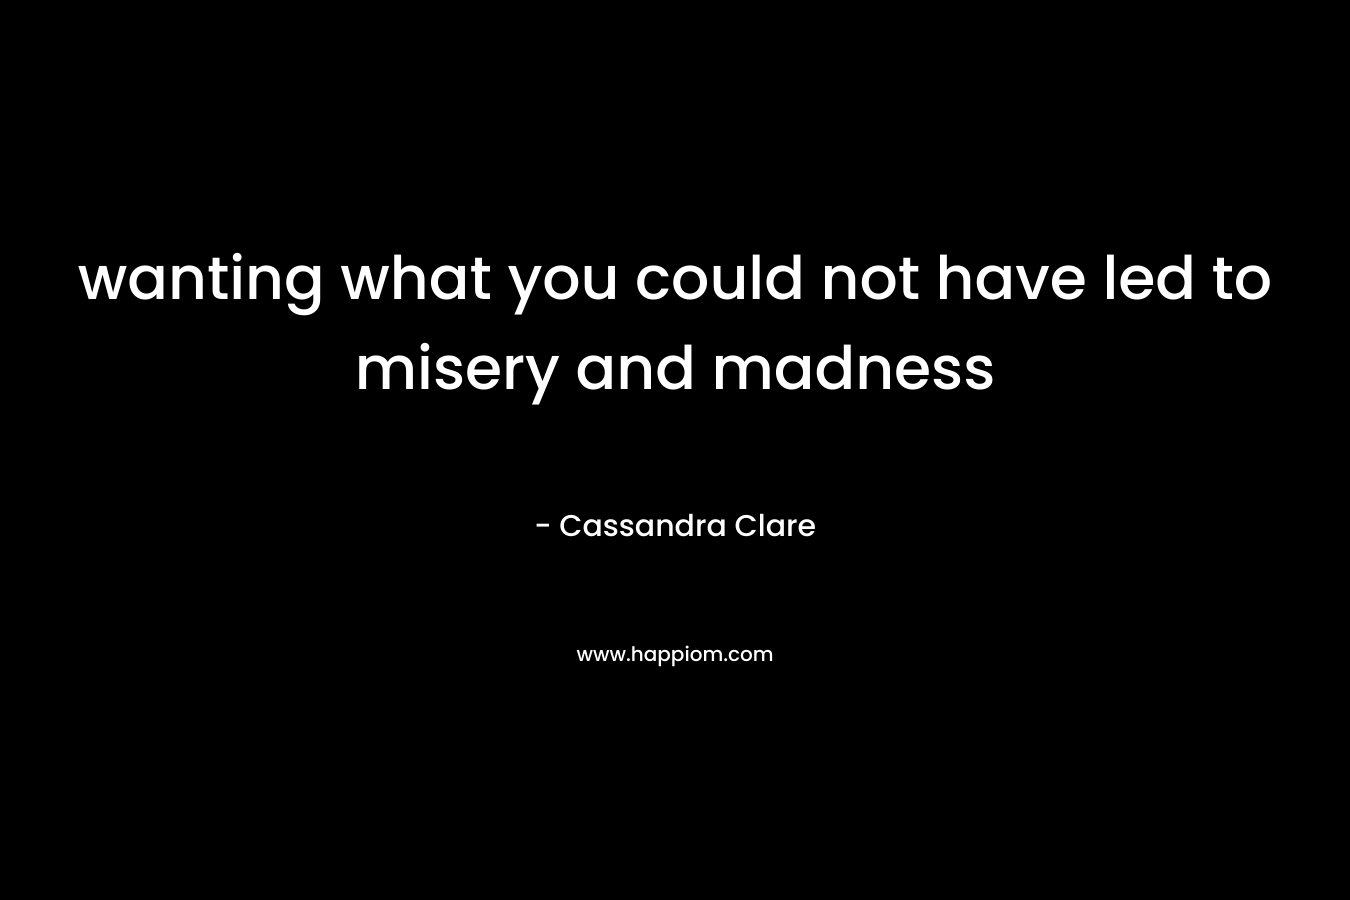 wanting what you could not have led to misery and madness – Cassandra Clare